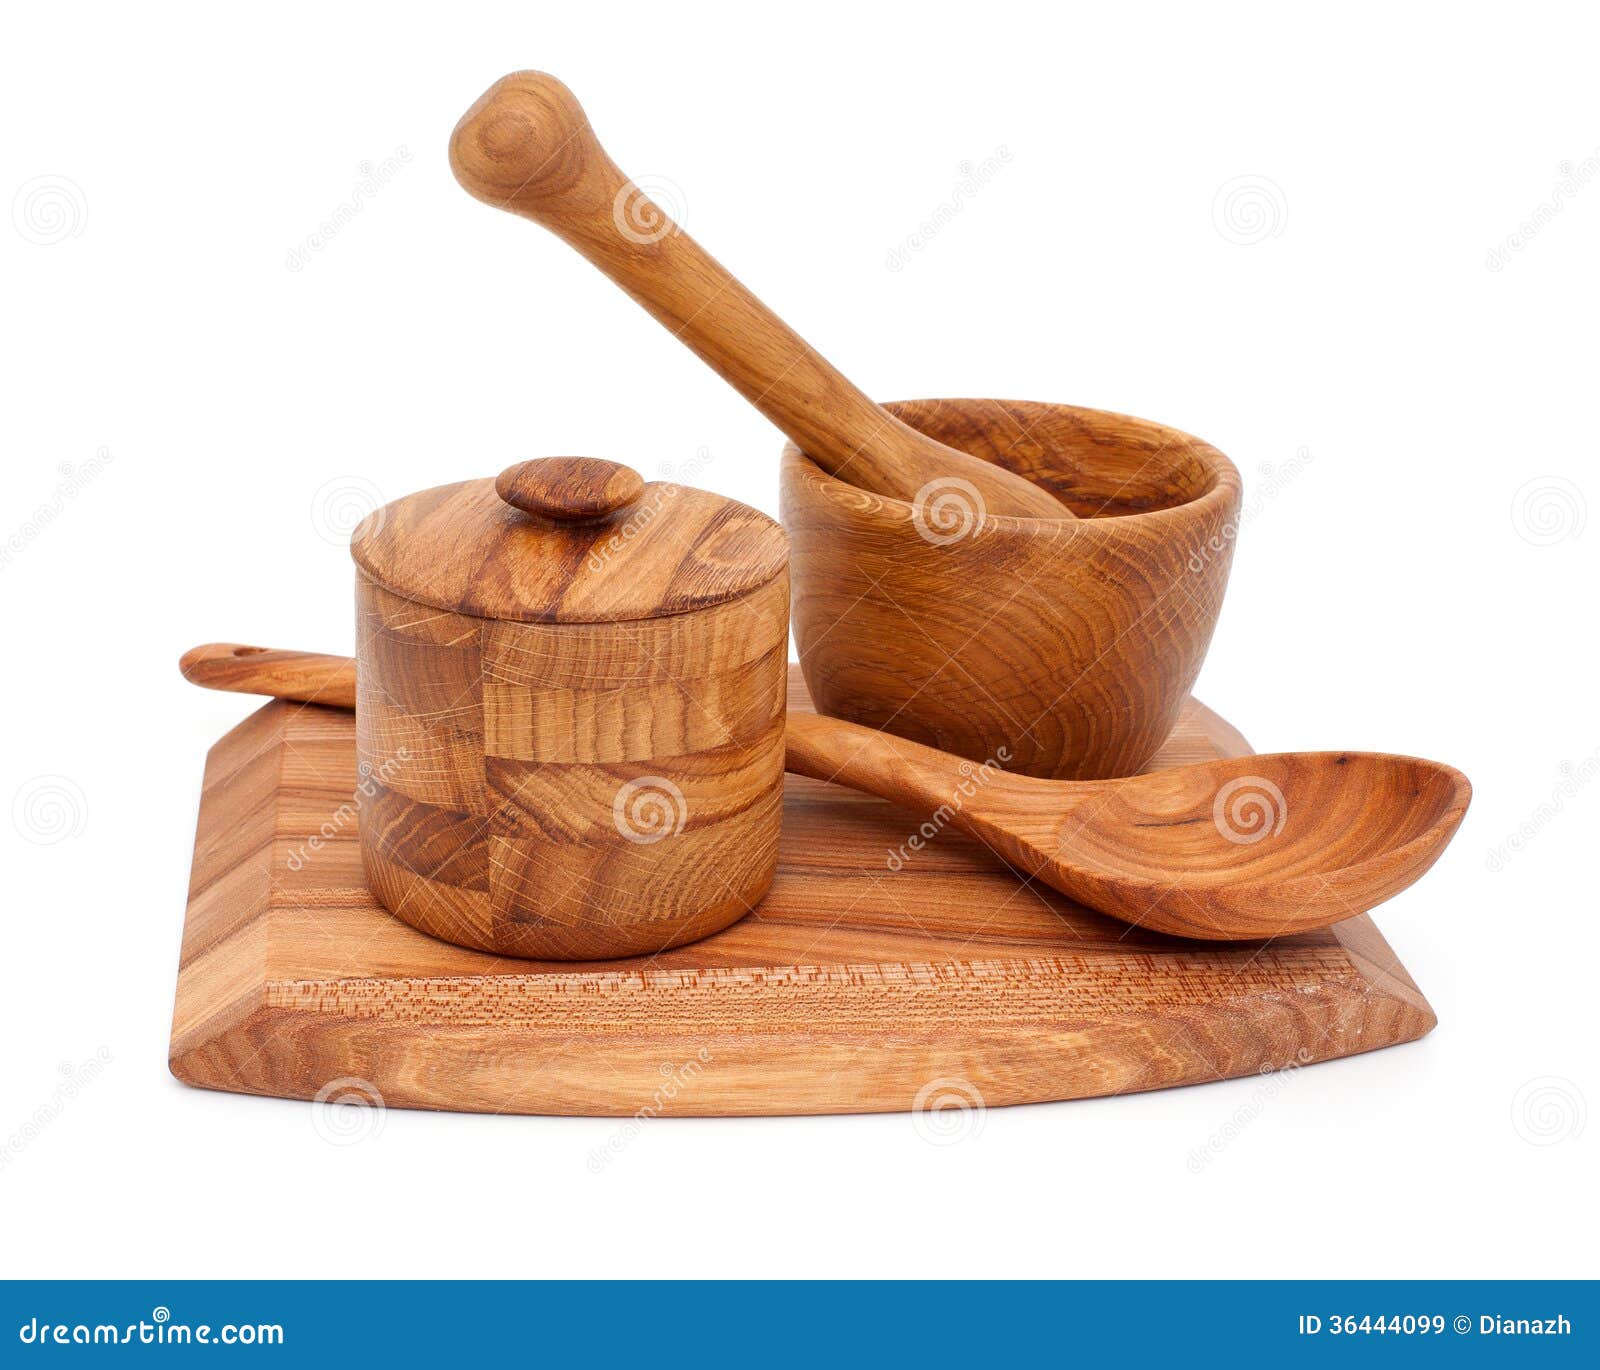 Wood Craft Royalty Free Stock Images - Image: 36444099